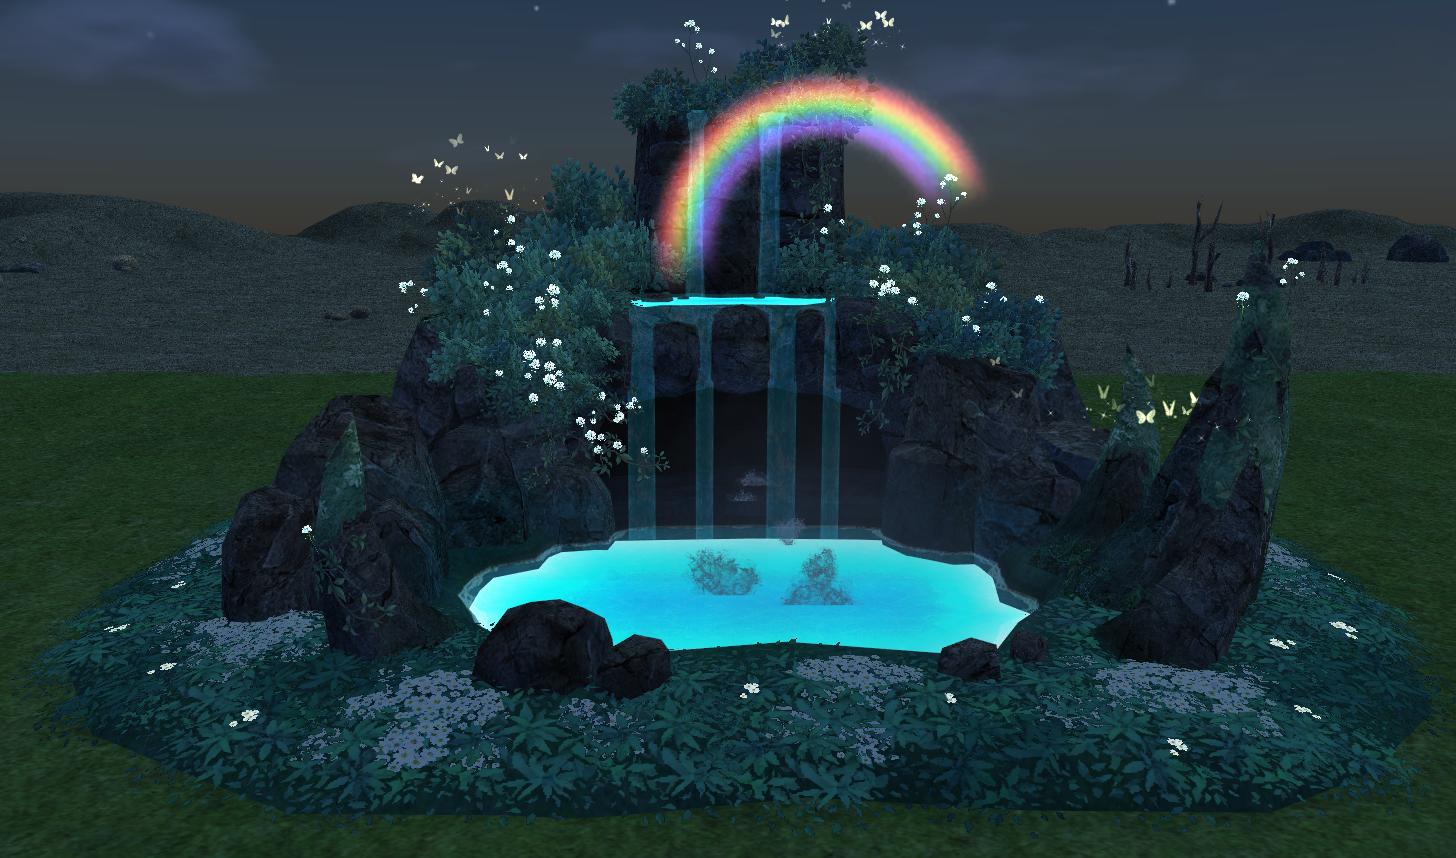 How Homestead Heavenly Waterfall appears at night